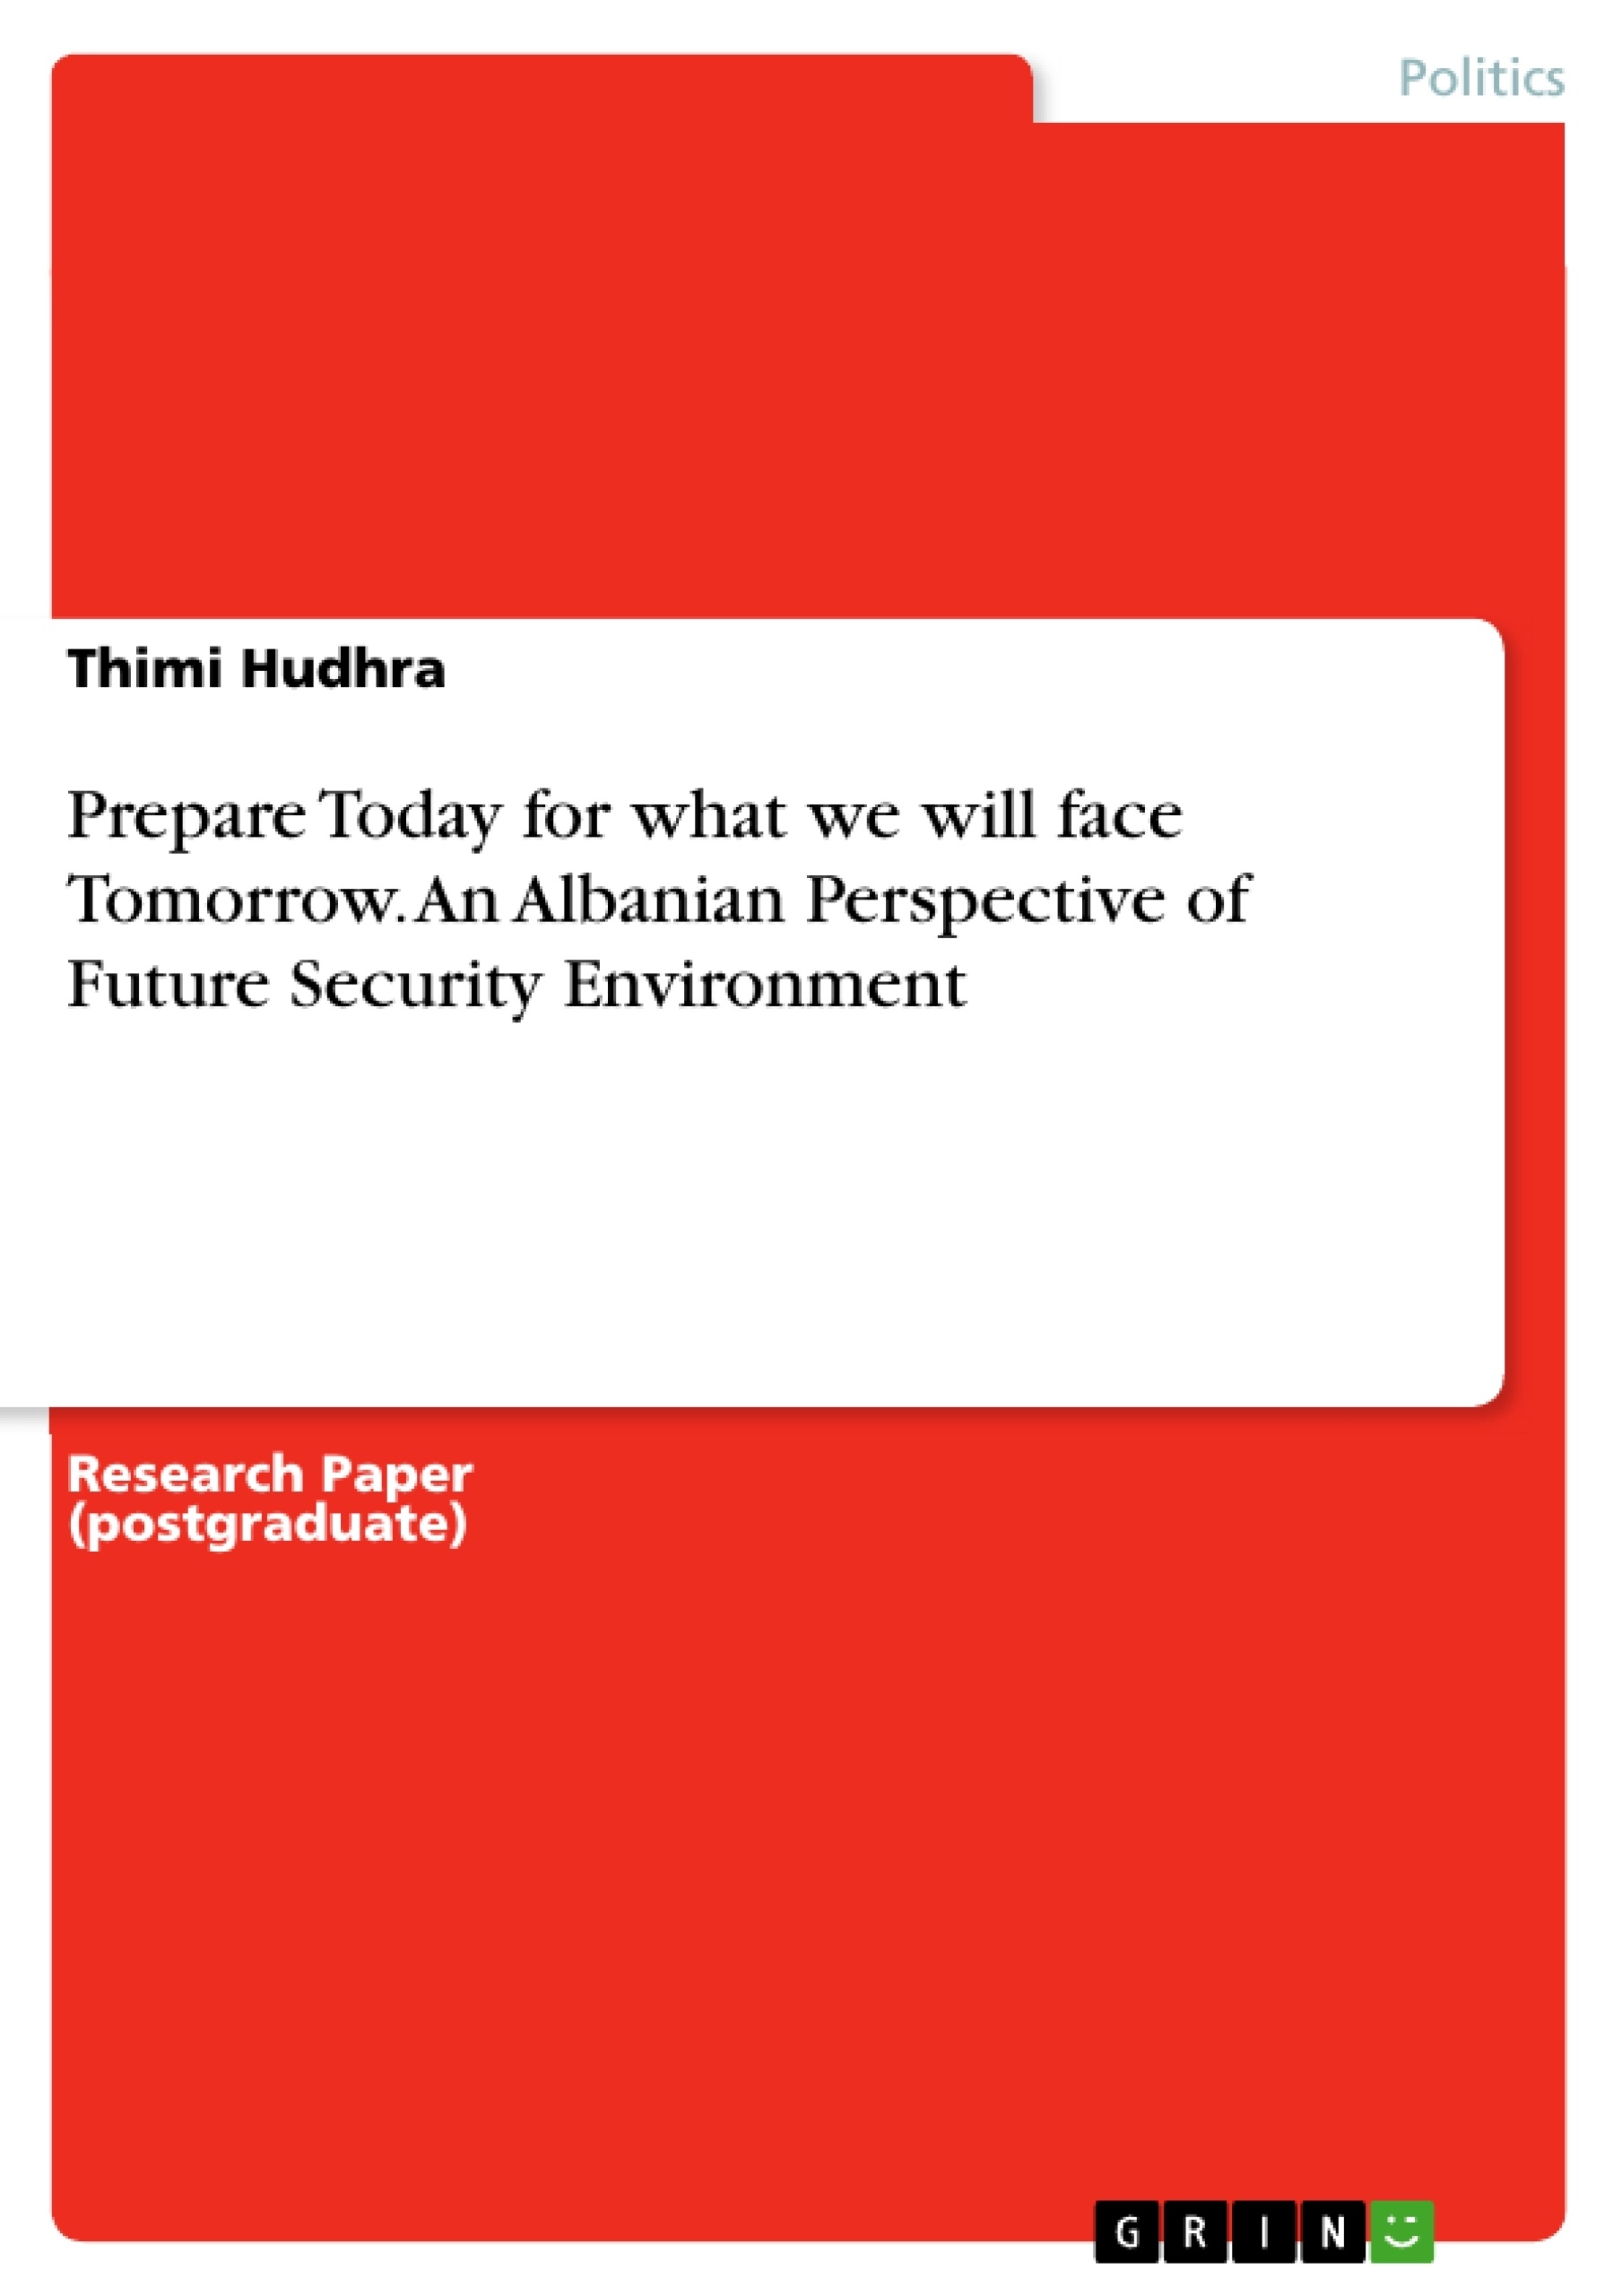 Title: Prepare Today for what we will face Tomorrow. An Albanian Perspective of Future Security Environment